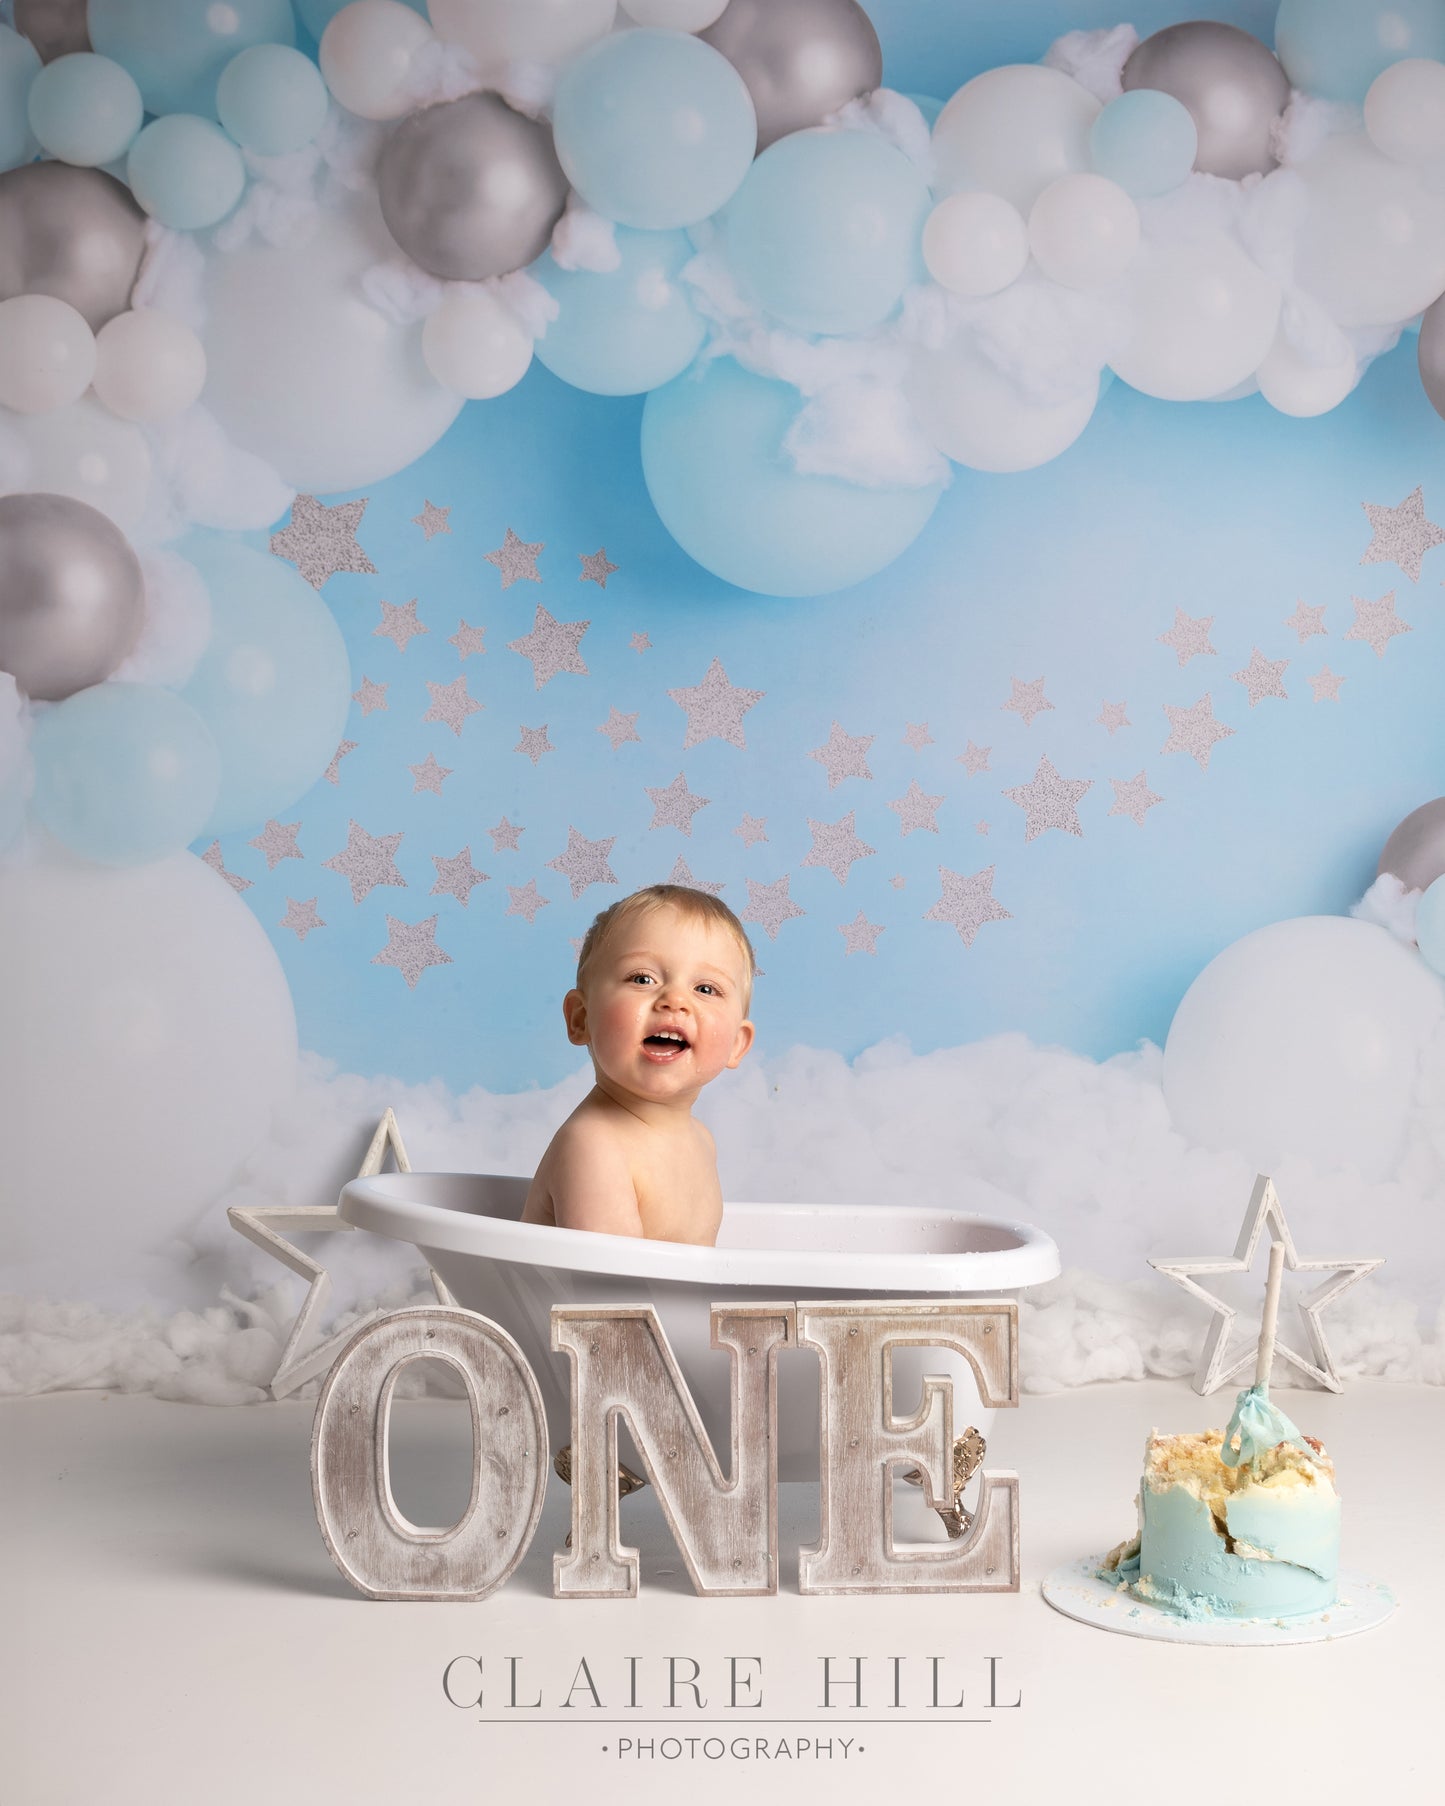 Telford Shrewsbury Shropshire Professional Cake Smash and splash photo shoot with Claire Hill Photography based in Wolverhampton West Midlands